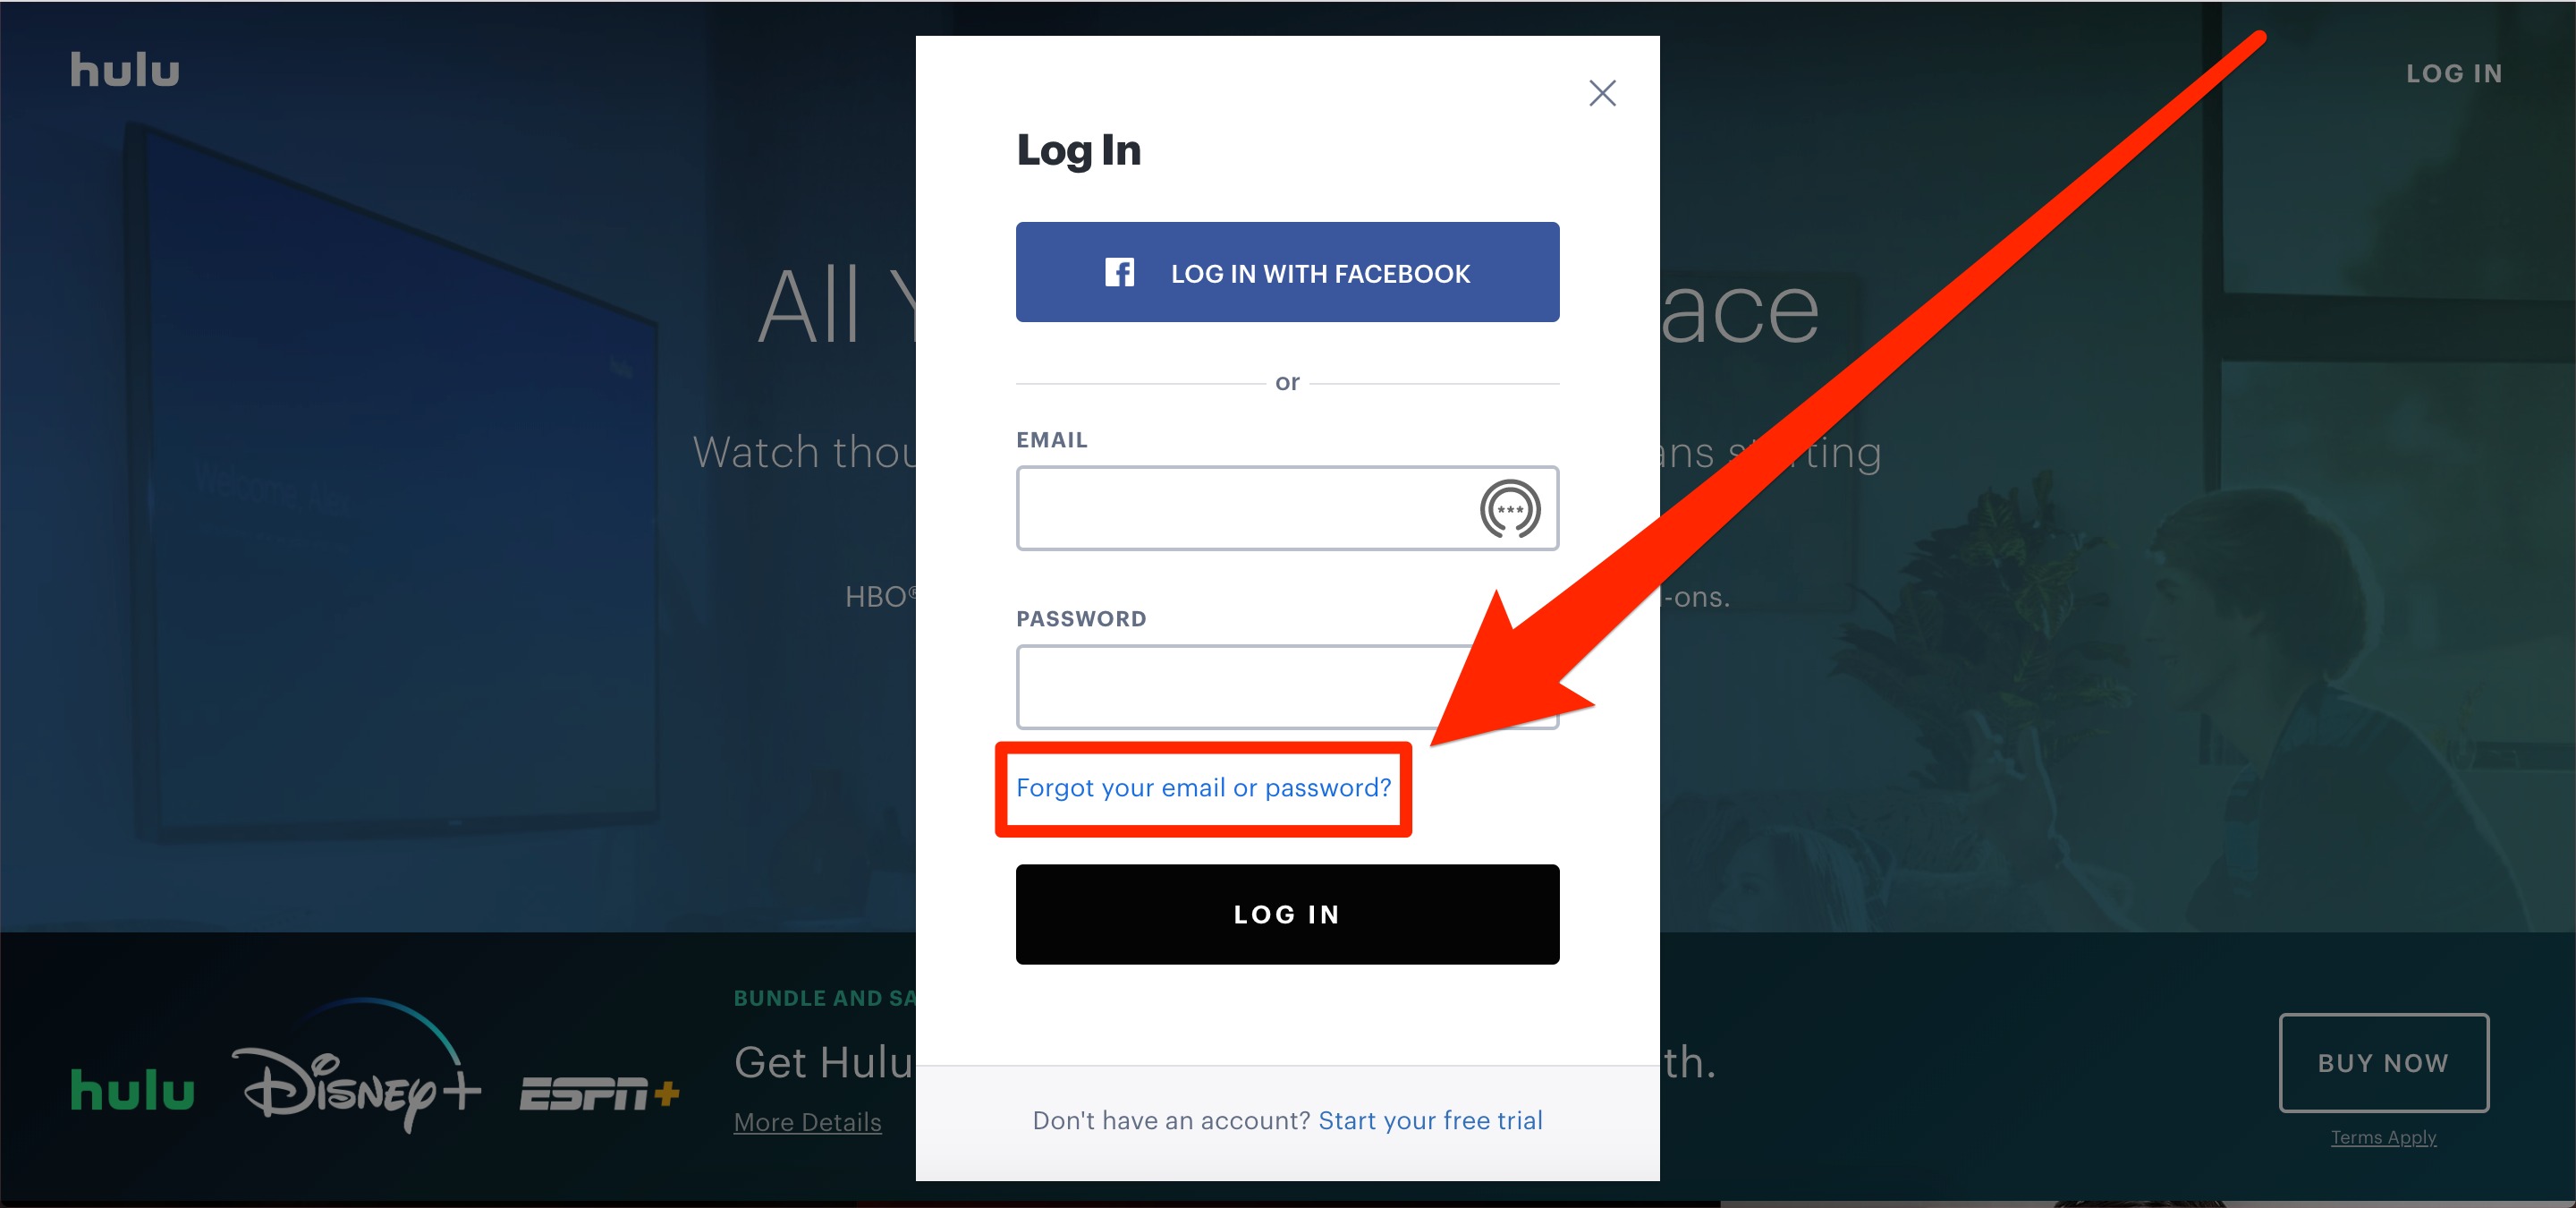 How To Change Or Reset A Hulu Password